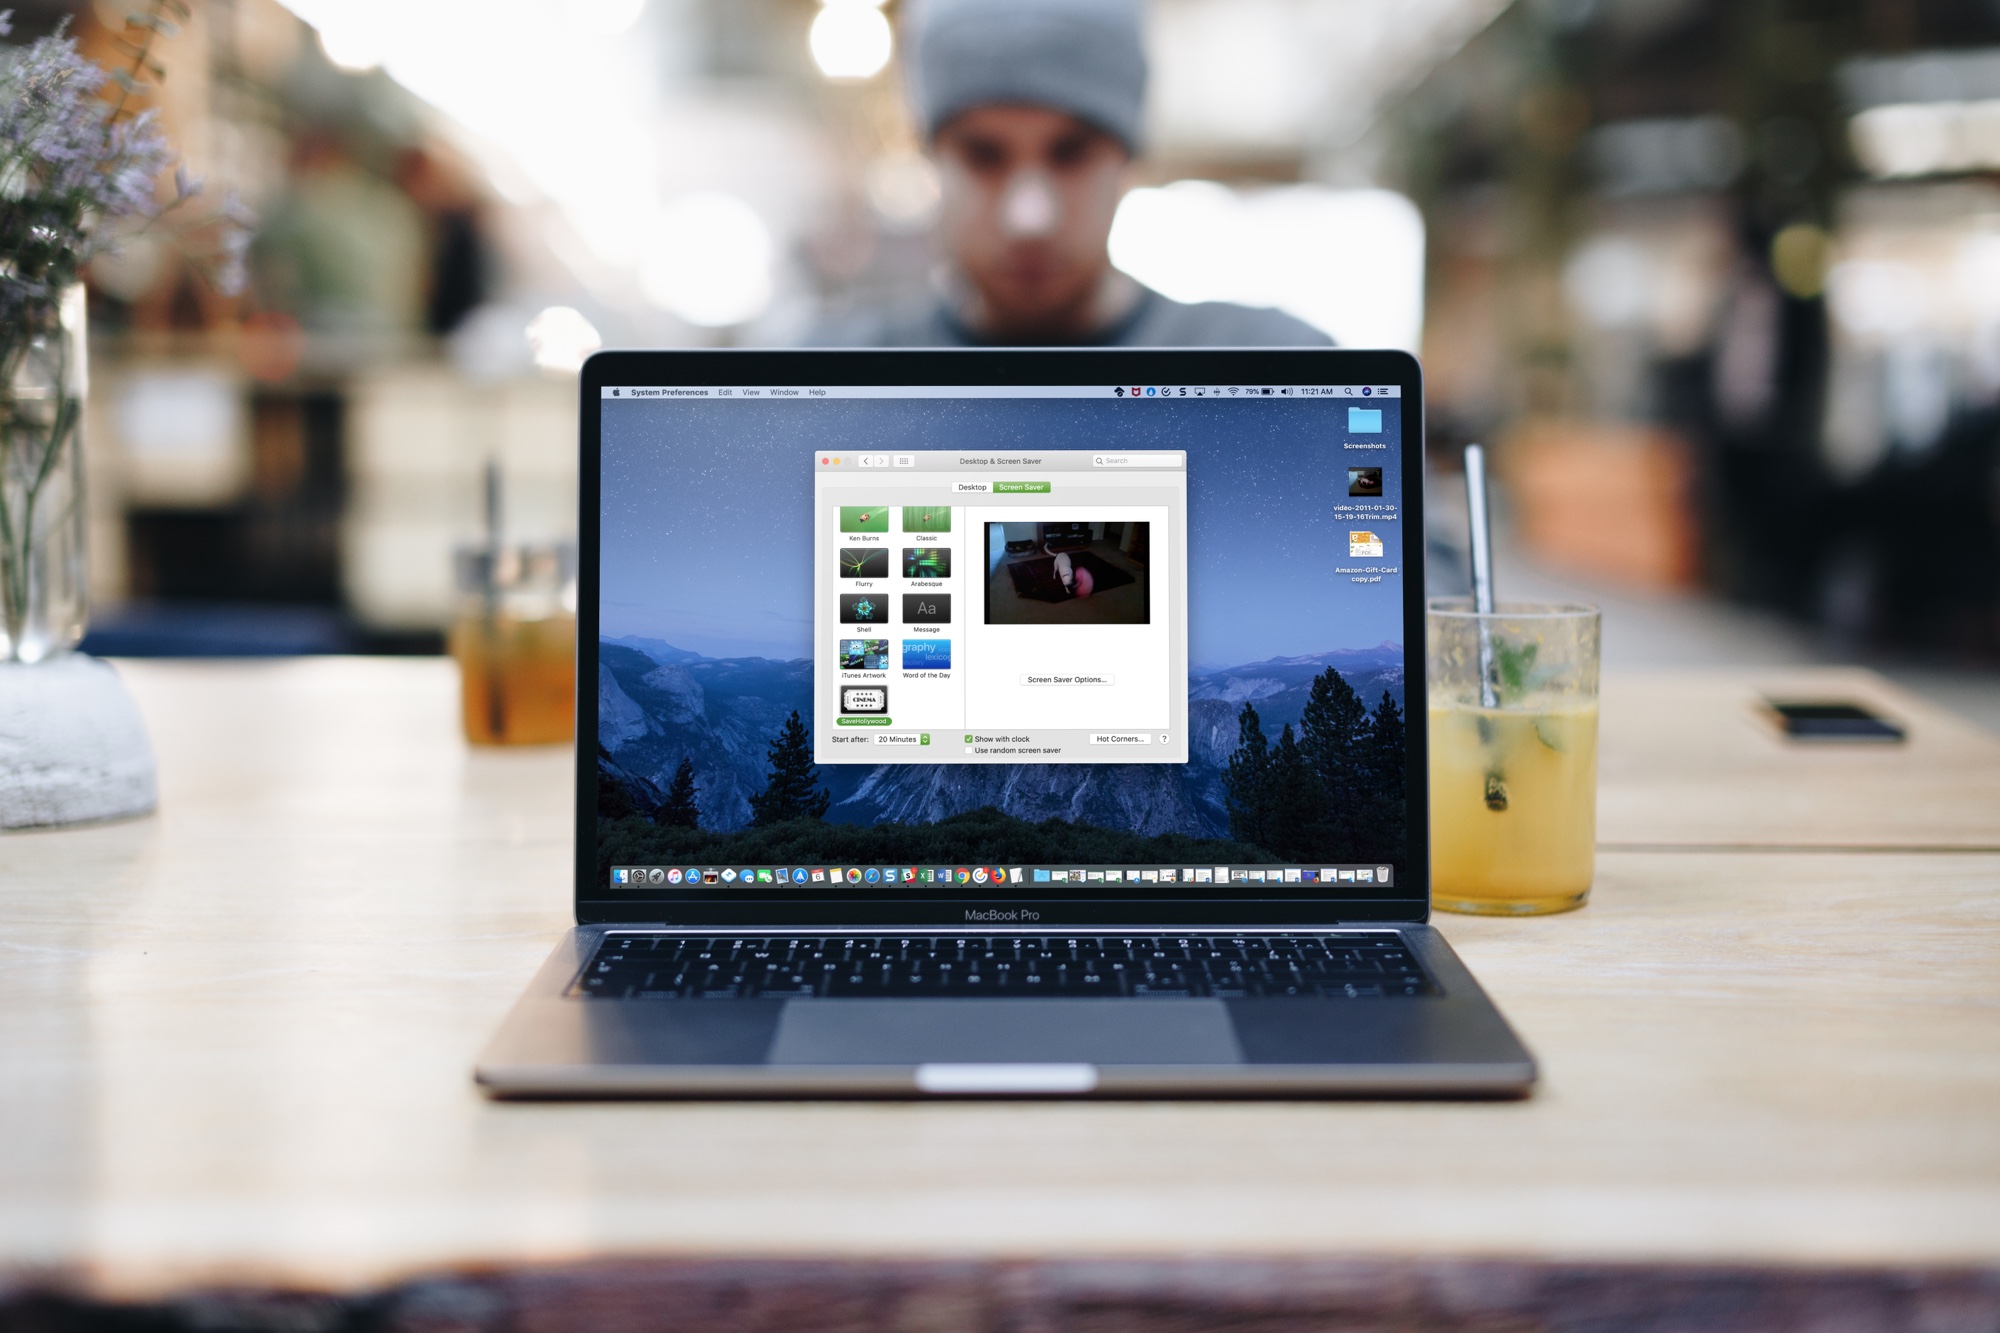 How To Use A Video As Your Mac Screen Saver